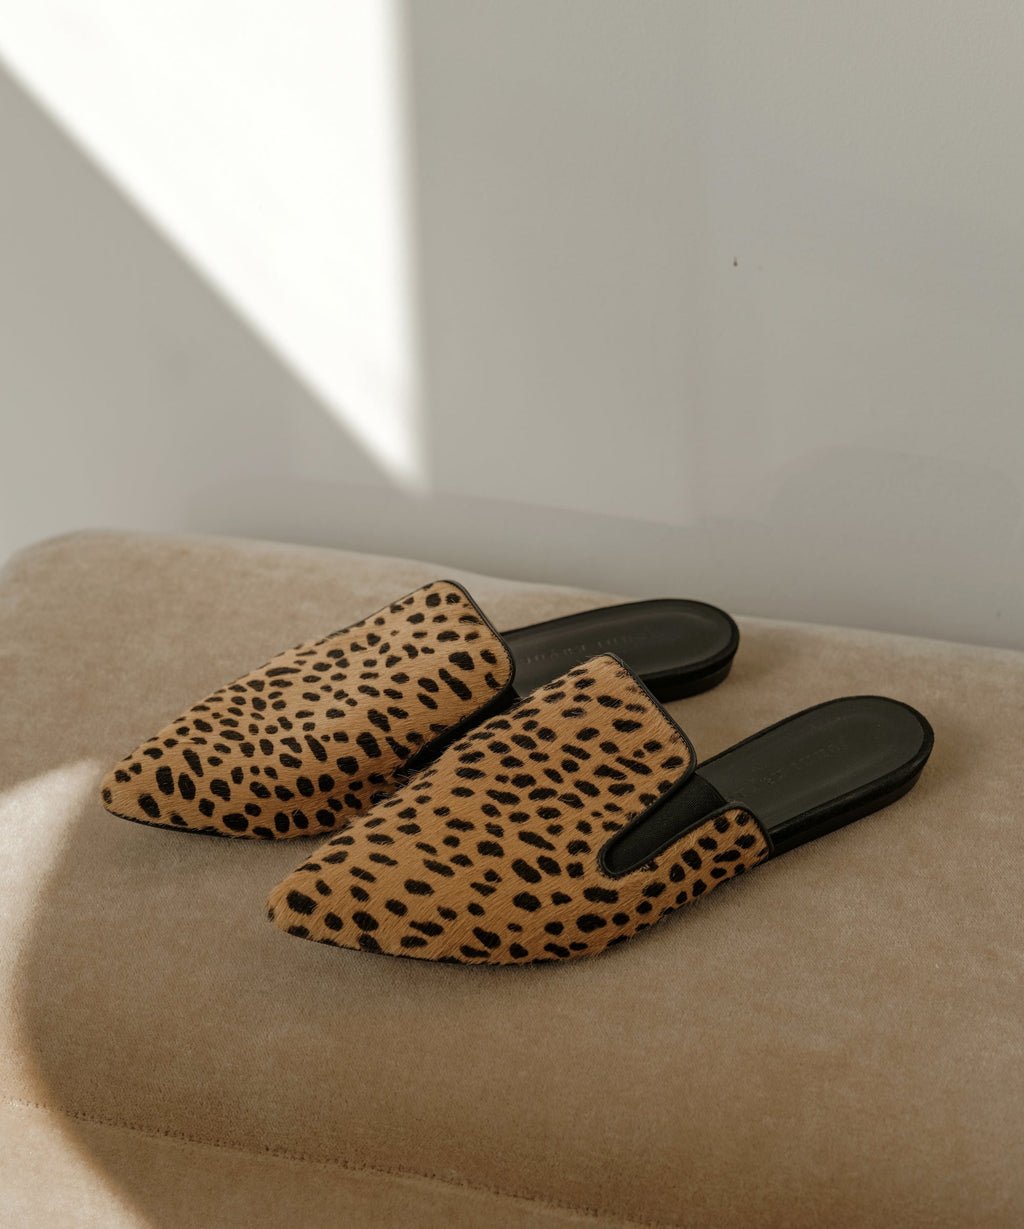 The Leopard Slides of My Dreams